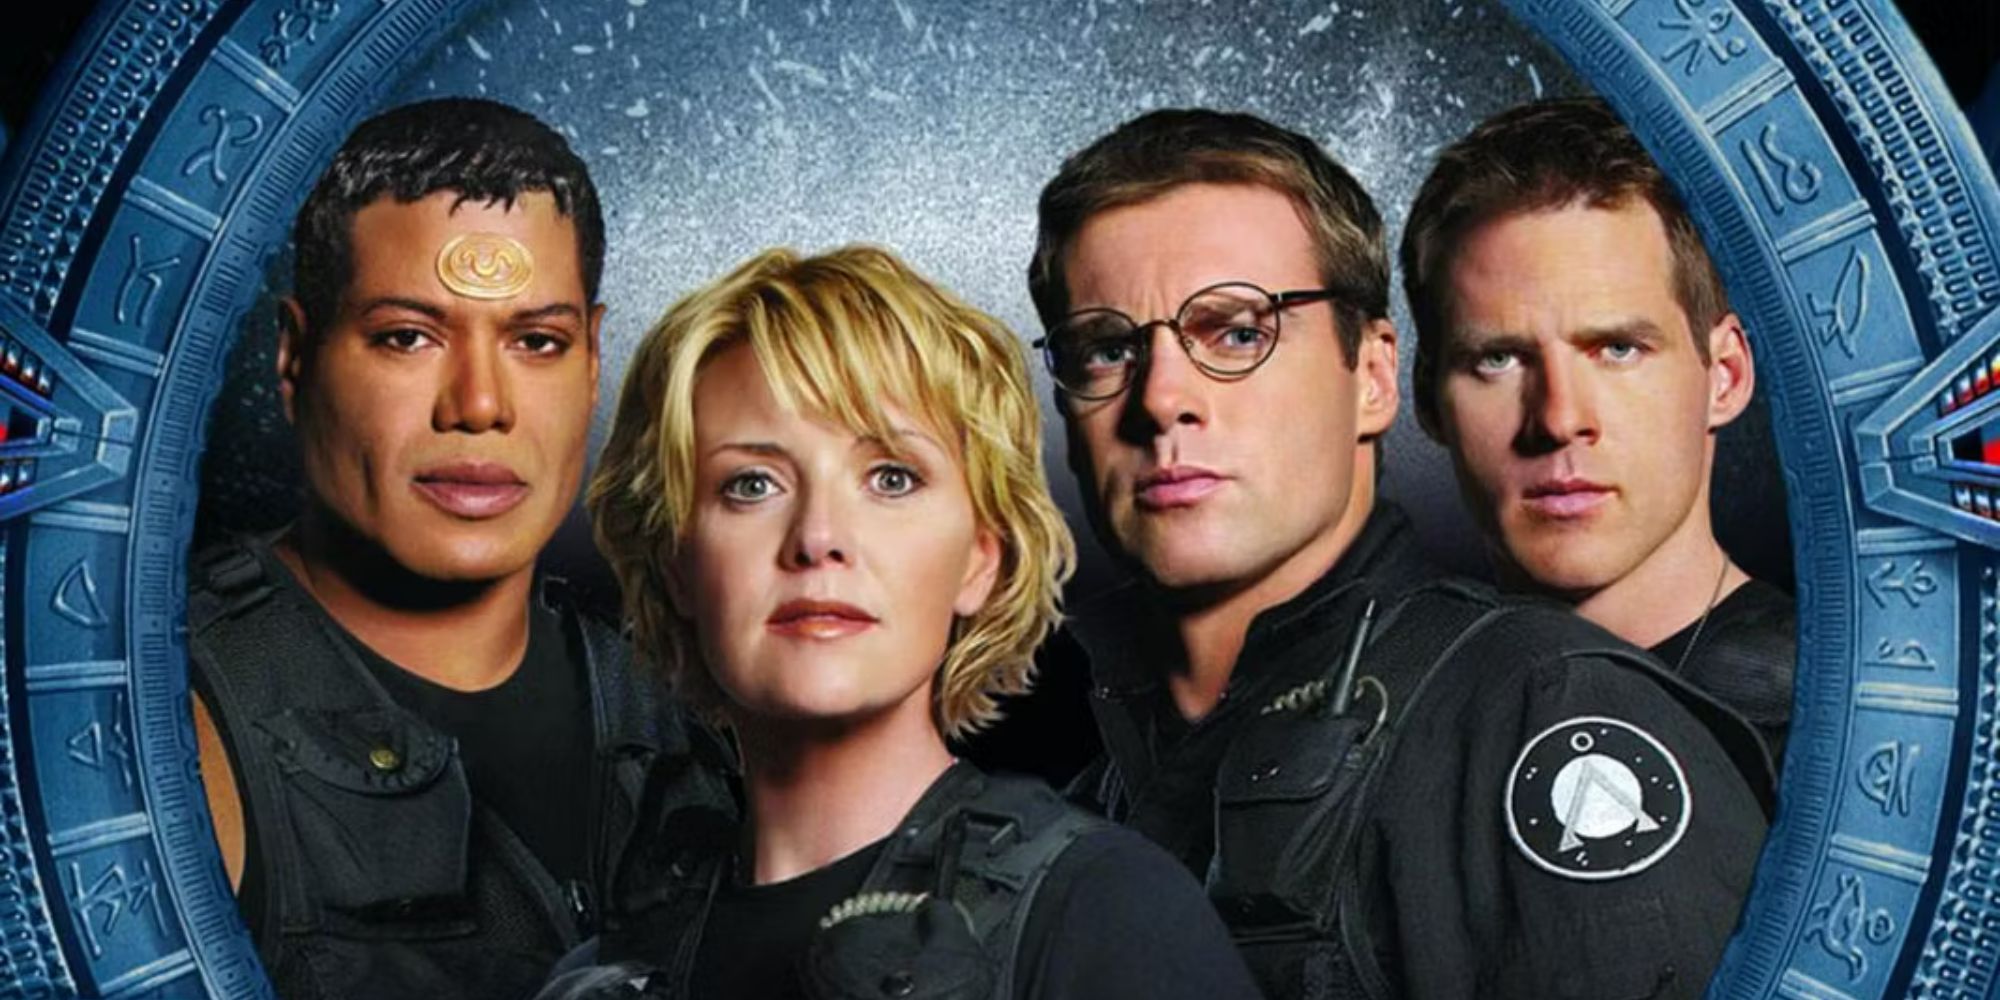 Teal'c (Christopher Judge), Samantha Carter (Amanda Tapping), Jack O'Neill (Richard Dean Anderson), and Daniel Jackson (Michael Shanks) in a promotional image for Stargate SG-1